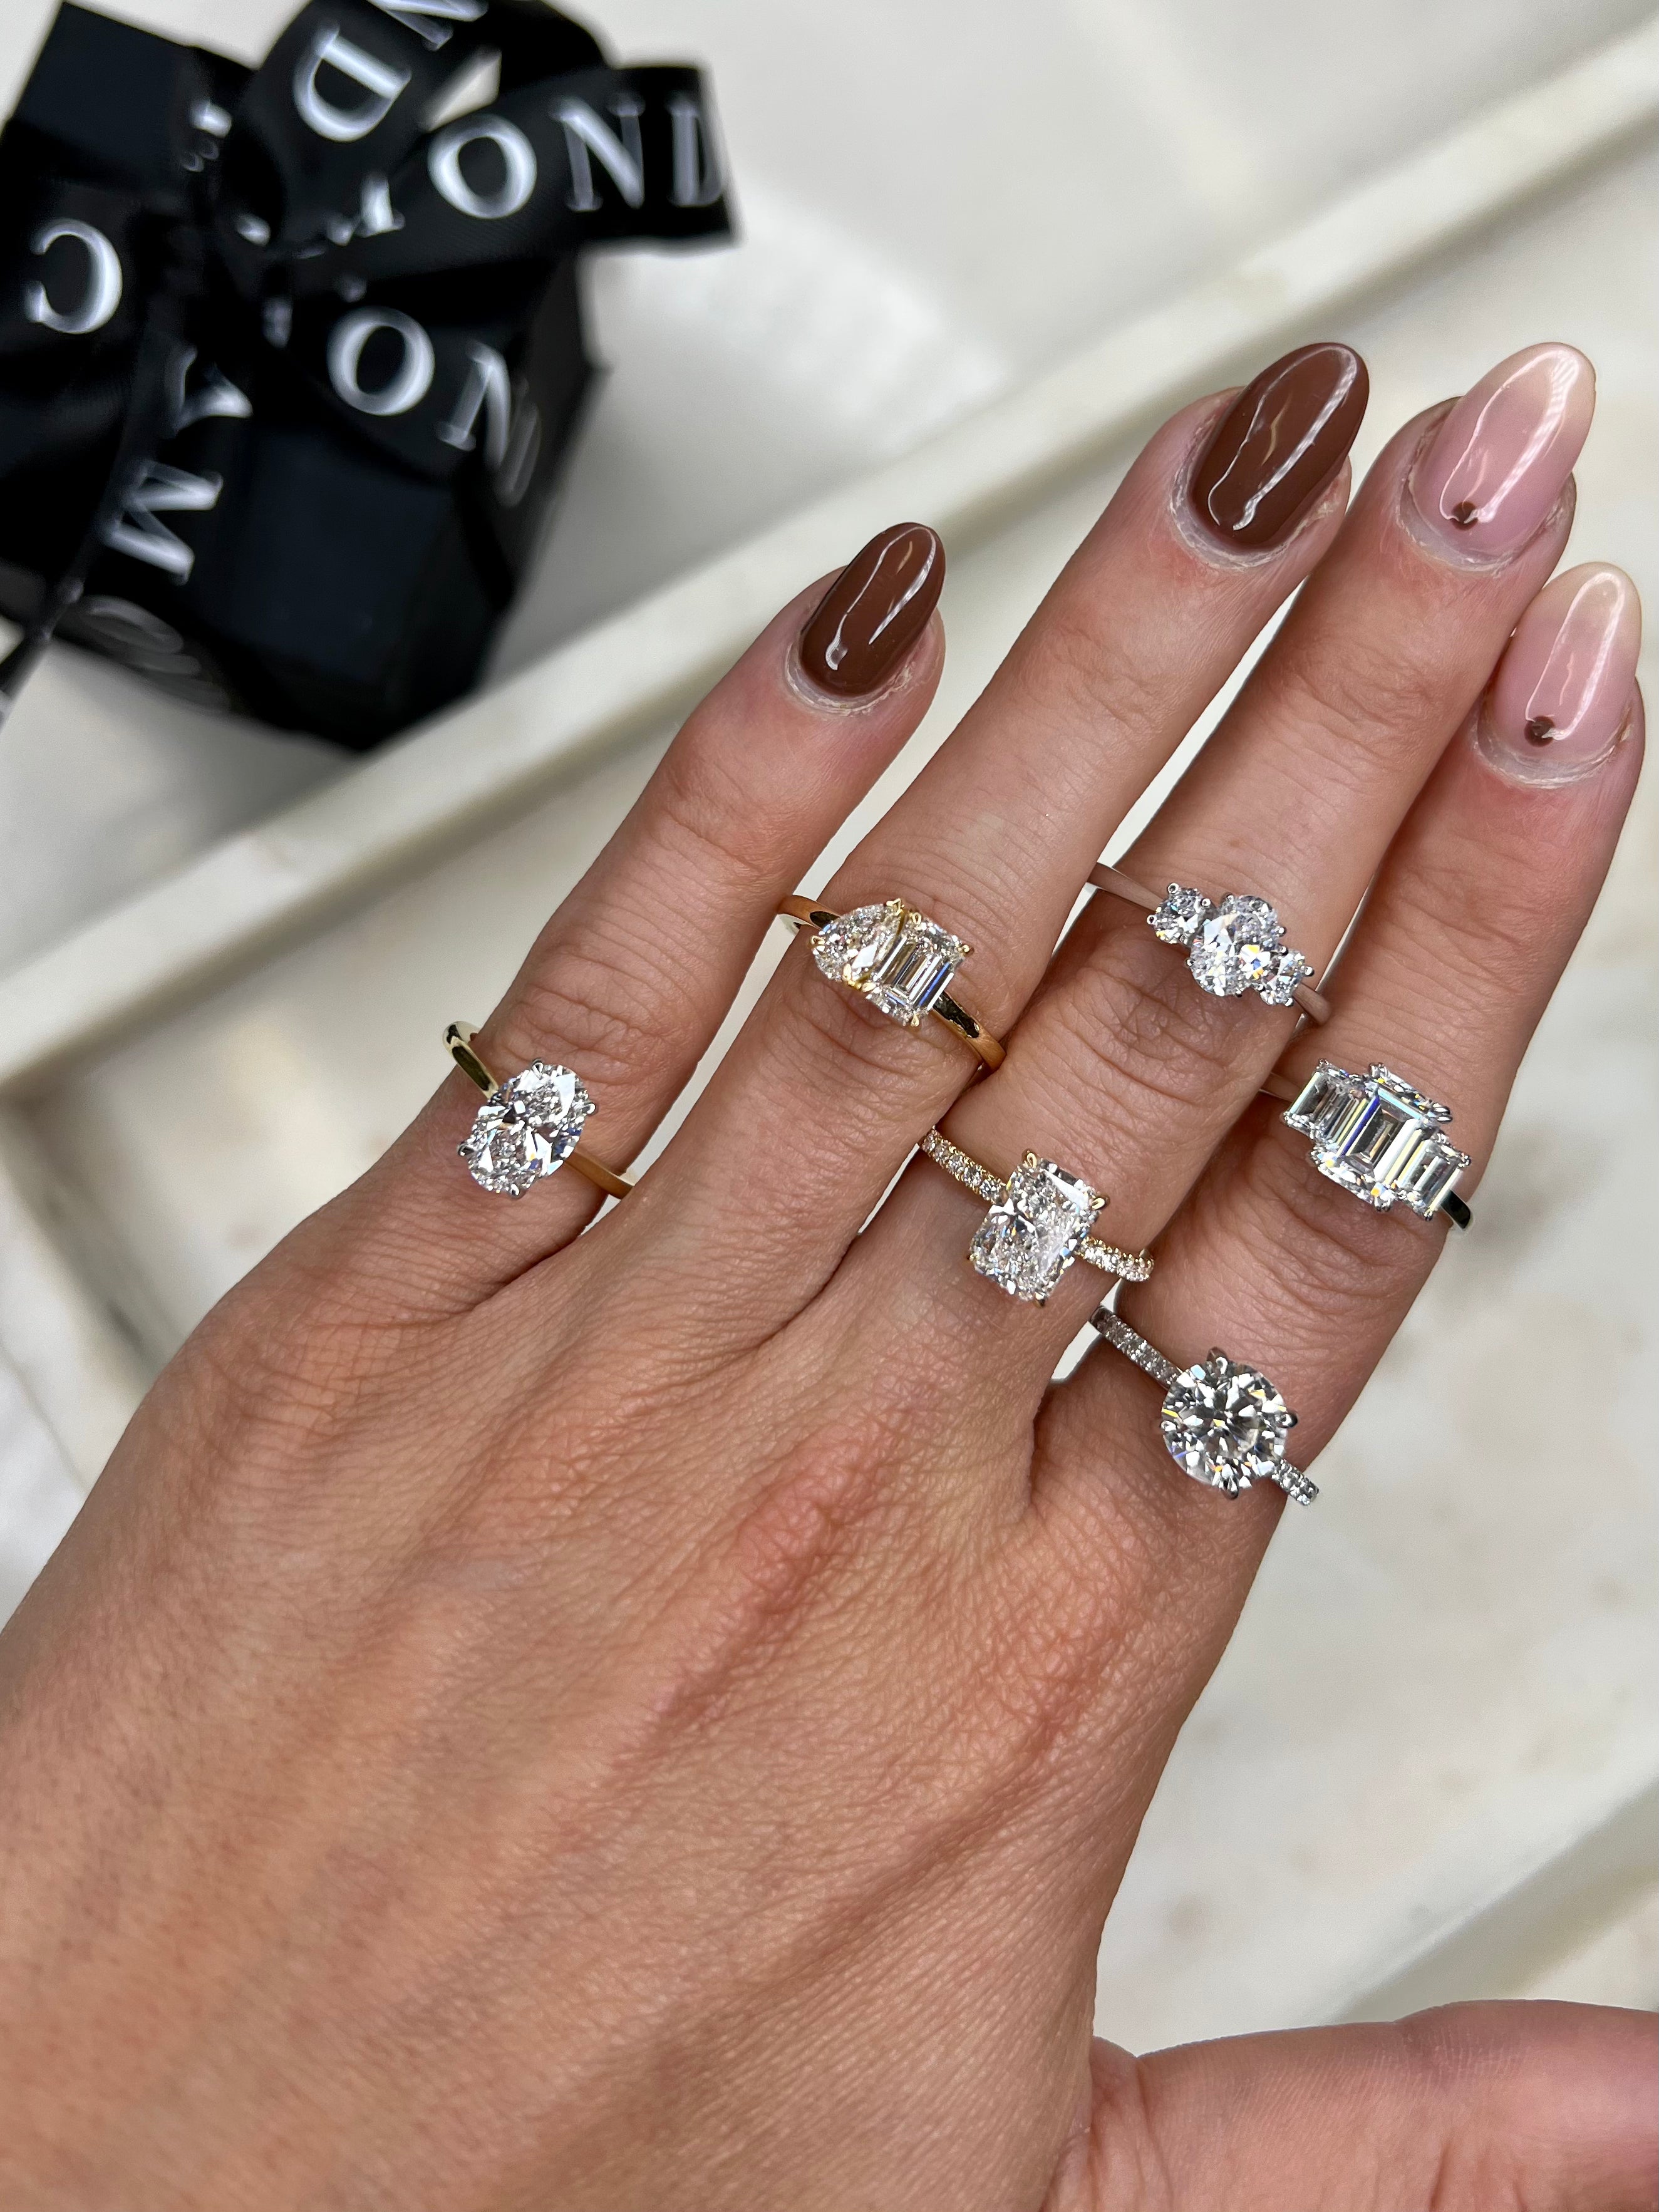 cool engagement ring designs